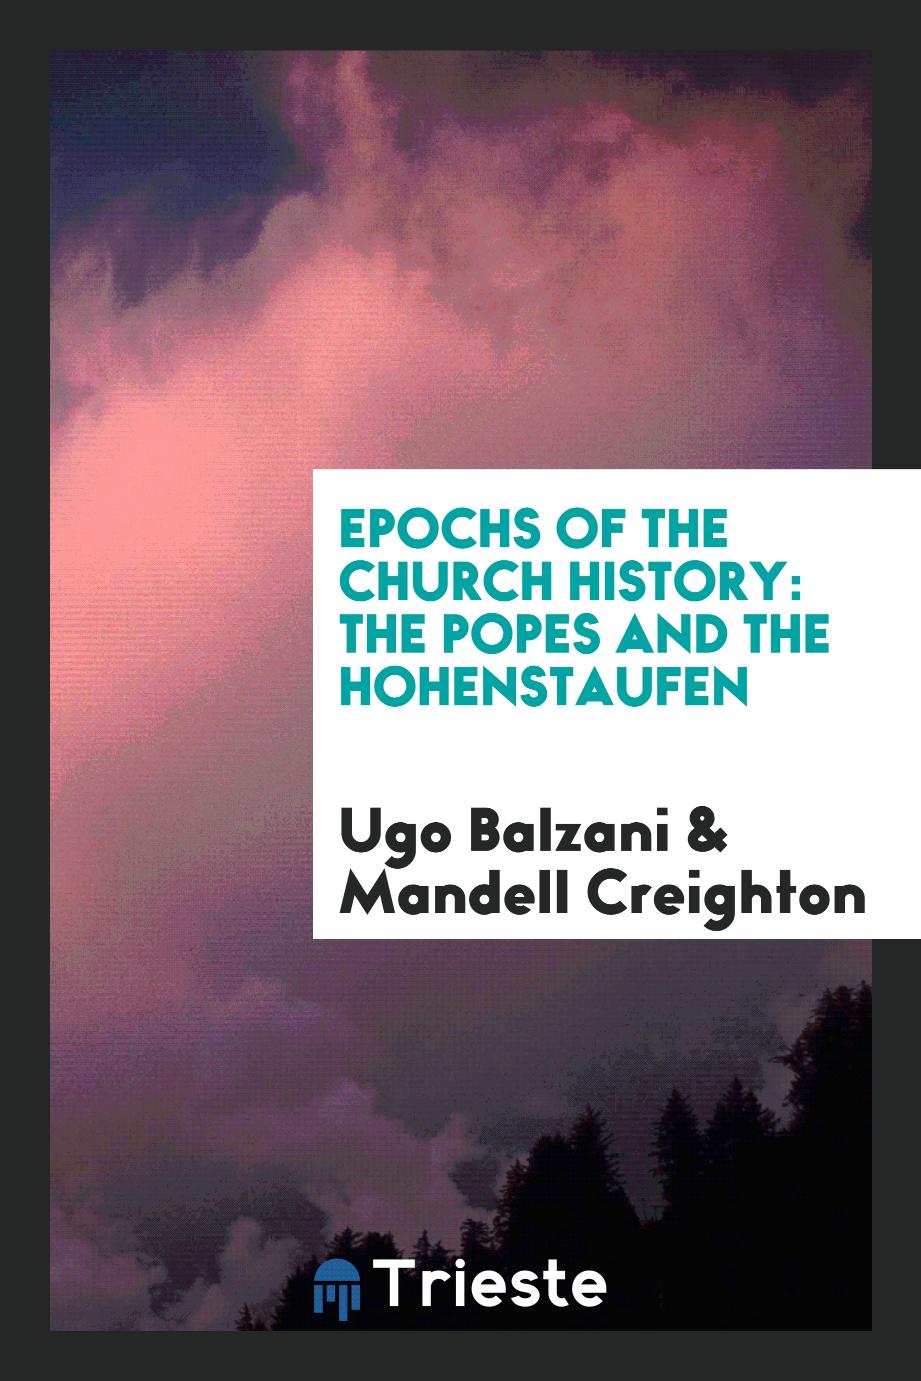 Epochs of the Church History: The Popes and the Hohenstaufen